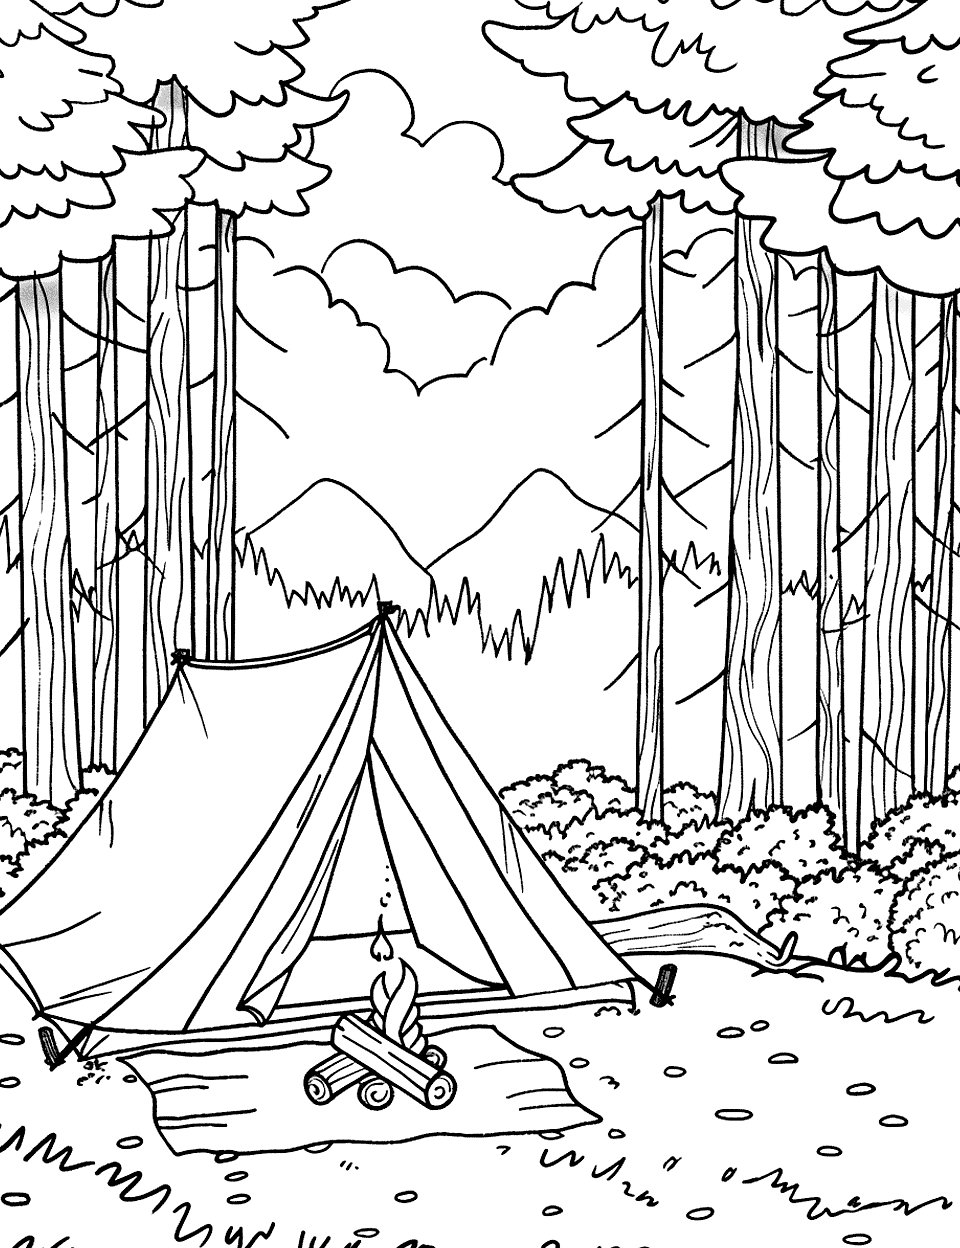 Forest Camping Scene Coloring Page - A tent set up in a clearing, surrounded by towering trees, with a small campfire.